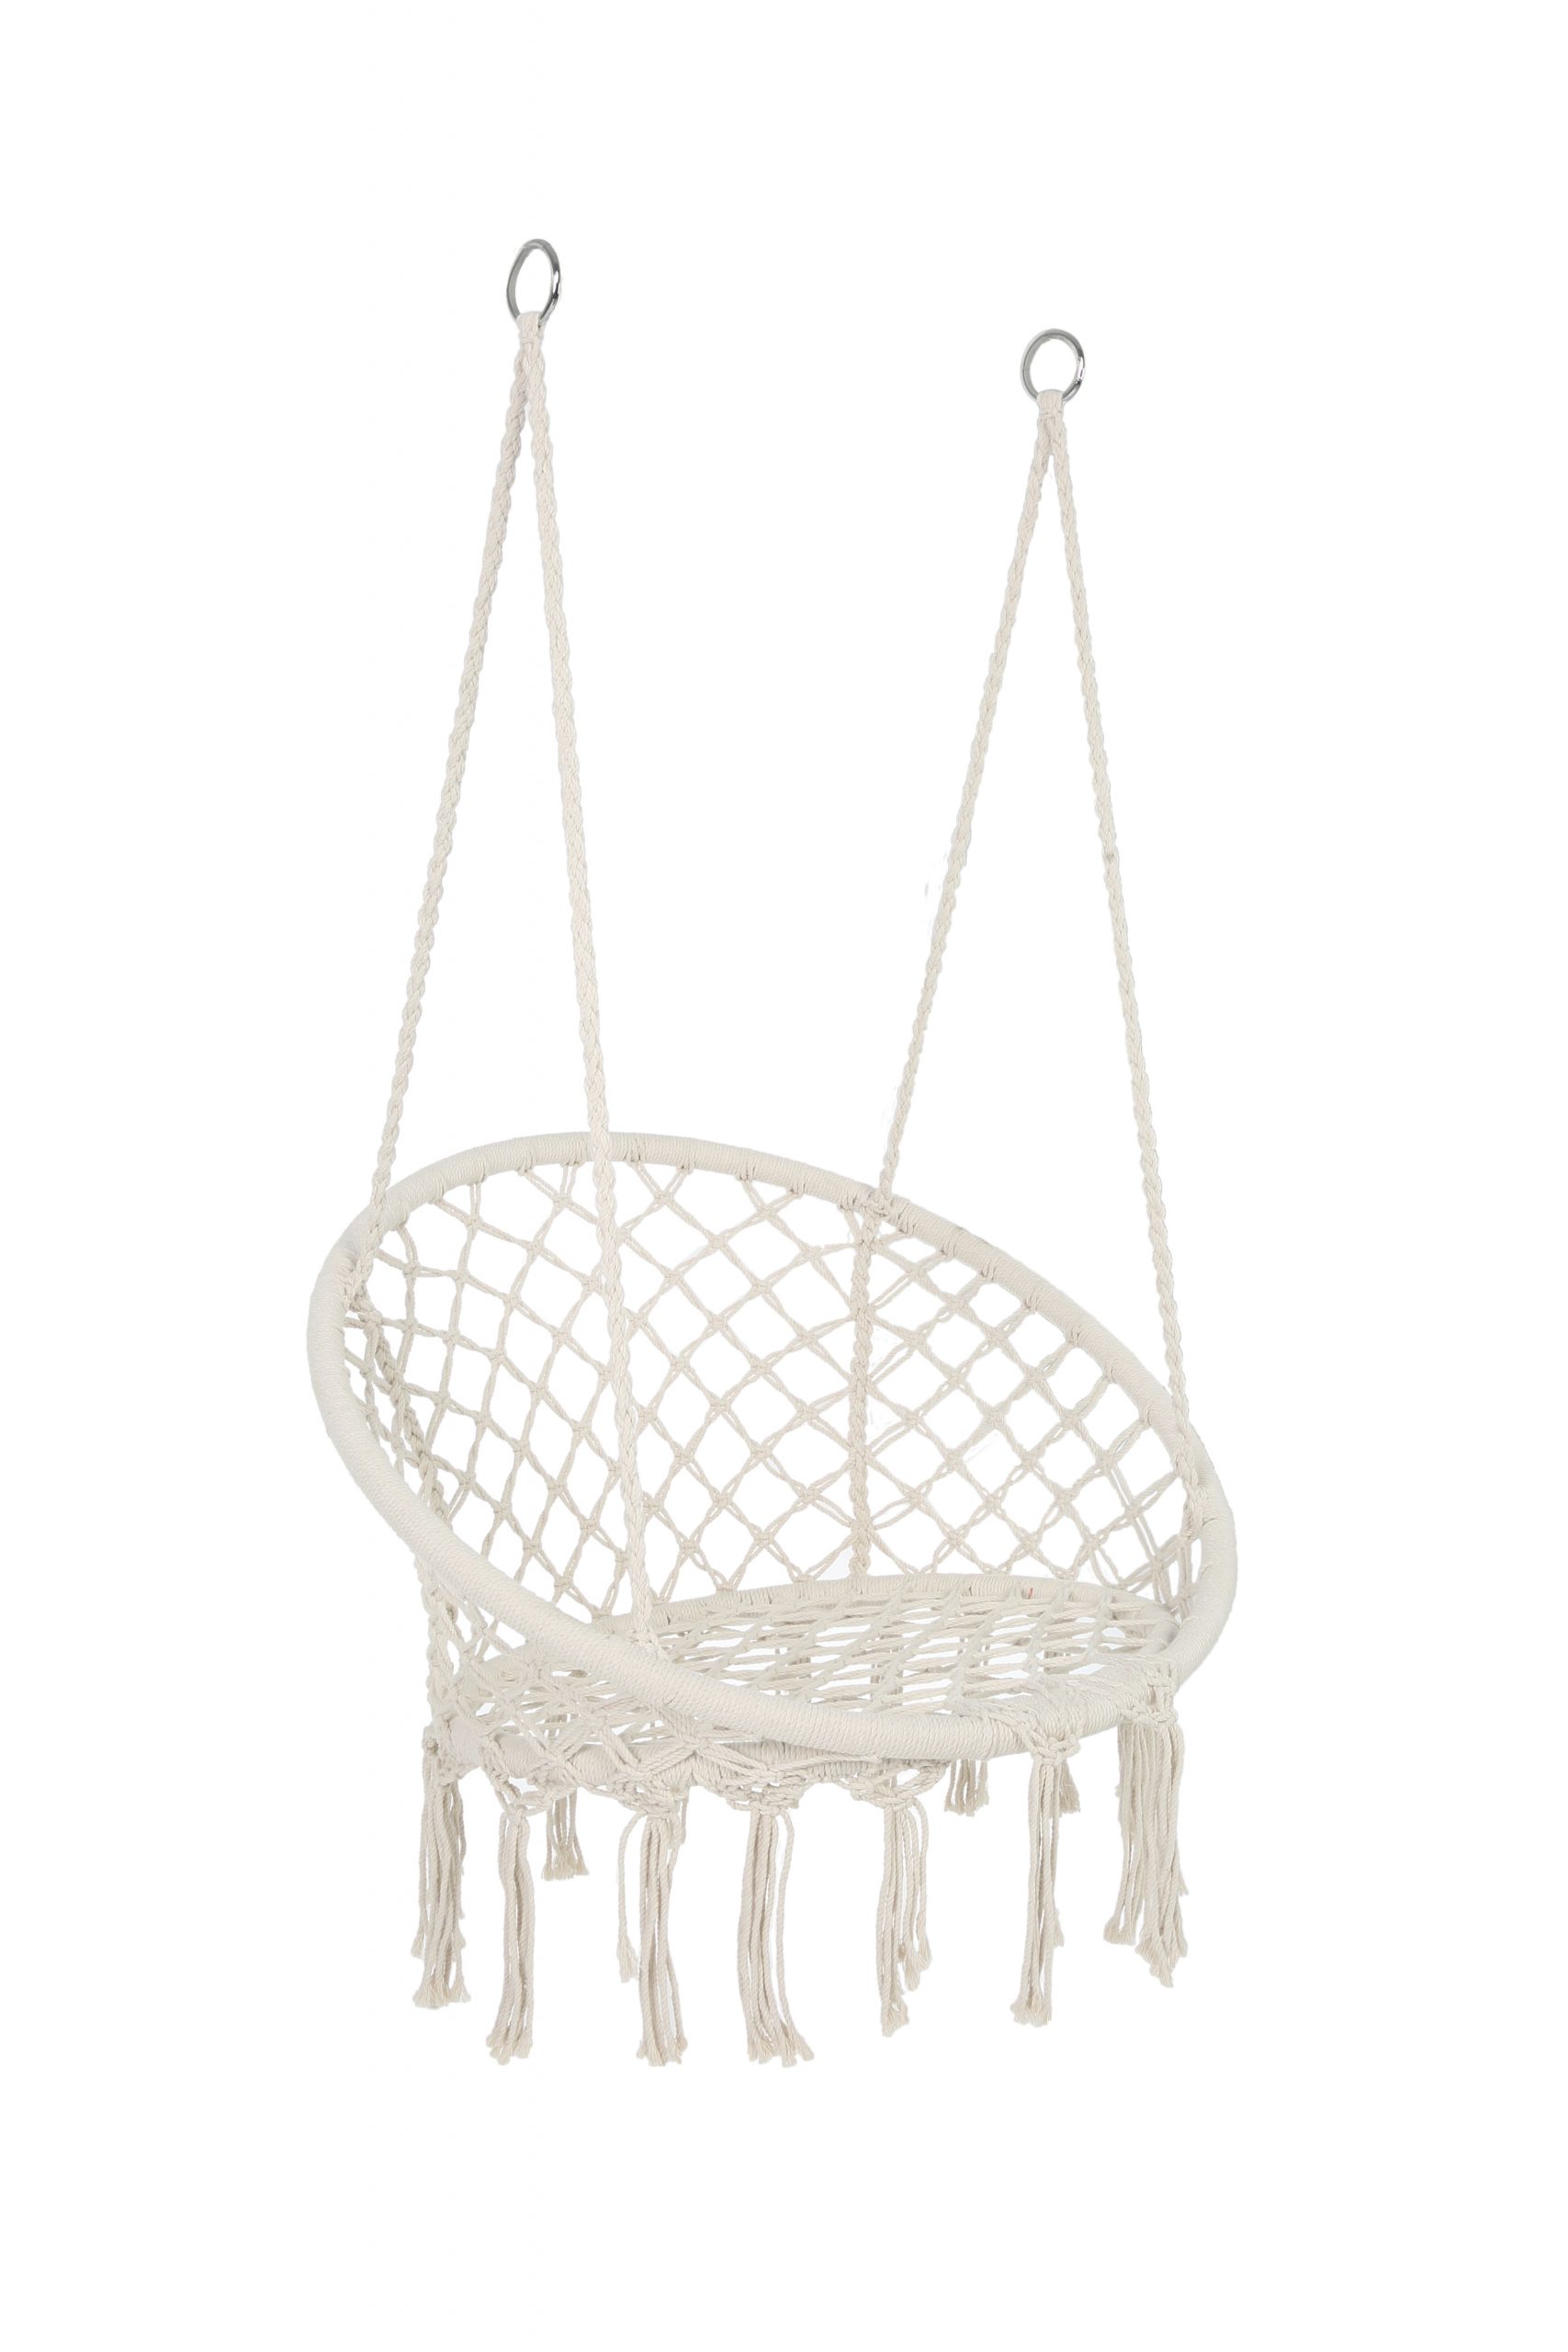 Max 330 Lbs Hanging Cotton Rope Hammock Swing Chair - W41917522